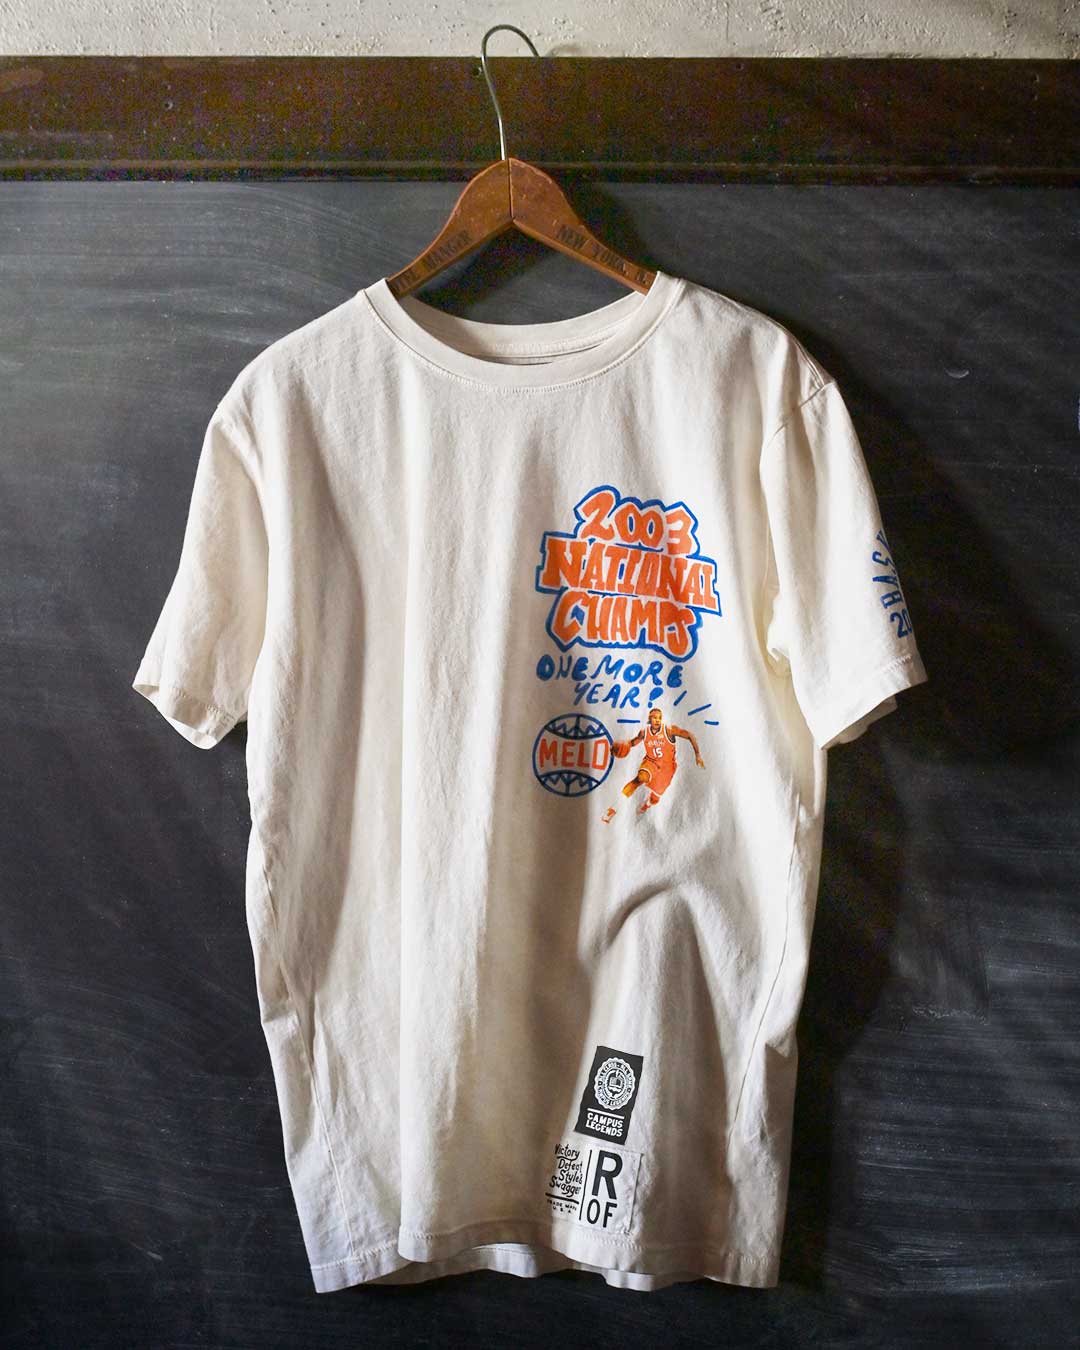 Melo 2003 Champ White Tee - Roots of Fight